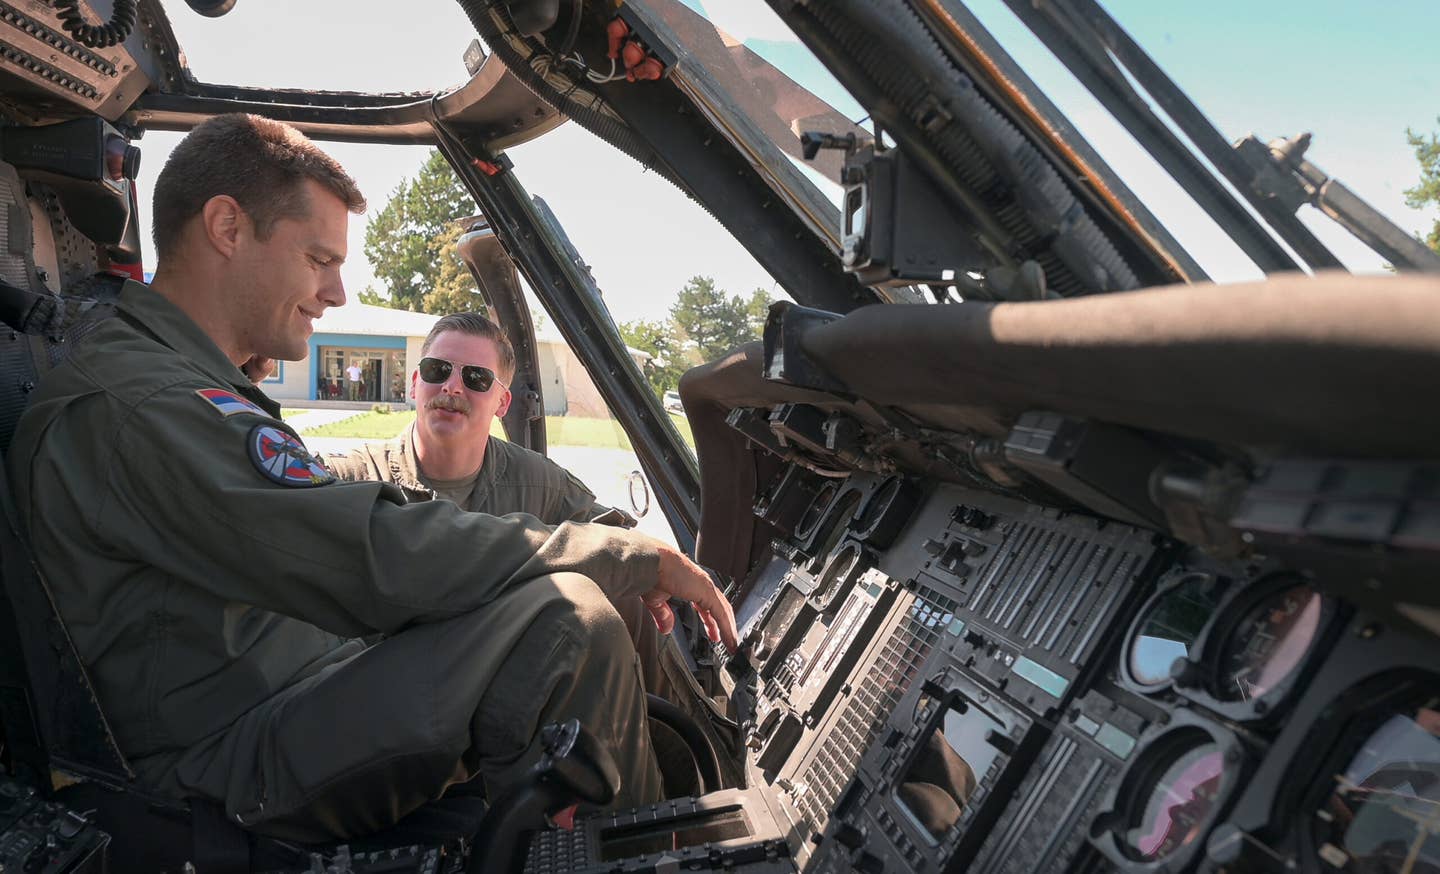 U.S. Air Force Capt. Samuel Unke, 56th Rescue Squadron pilot, demonstrates the capabilities of a U.S. Air Force HH-60G Pave Hawk helicopter to a Serbian Air Force pilot assigned to the 890th Mixed Helicopter Squadron, at Sgt./Pilot Mihajlo Petrovic Air Base, Serbia, Aug. 9, 2023. <em>U.S. Air Force photo by Airman 1st Class Edgar Grimaldo</em>